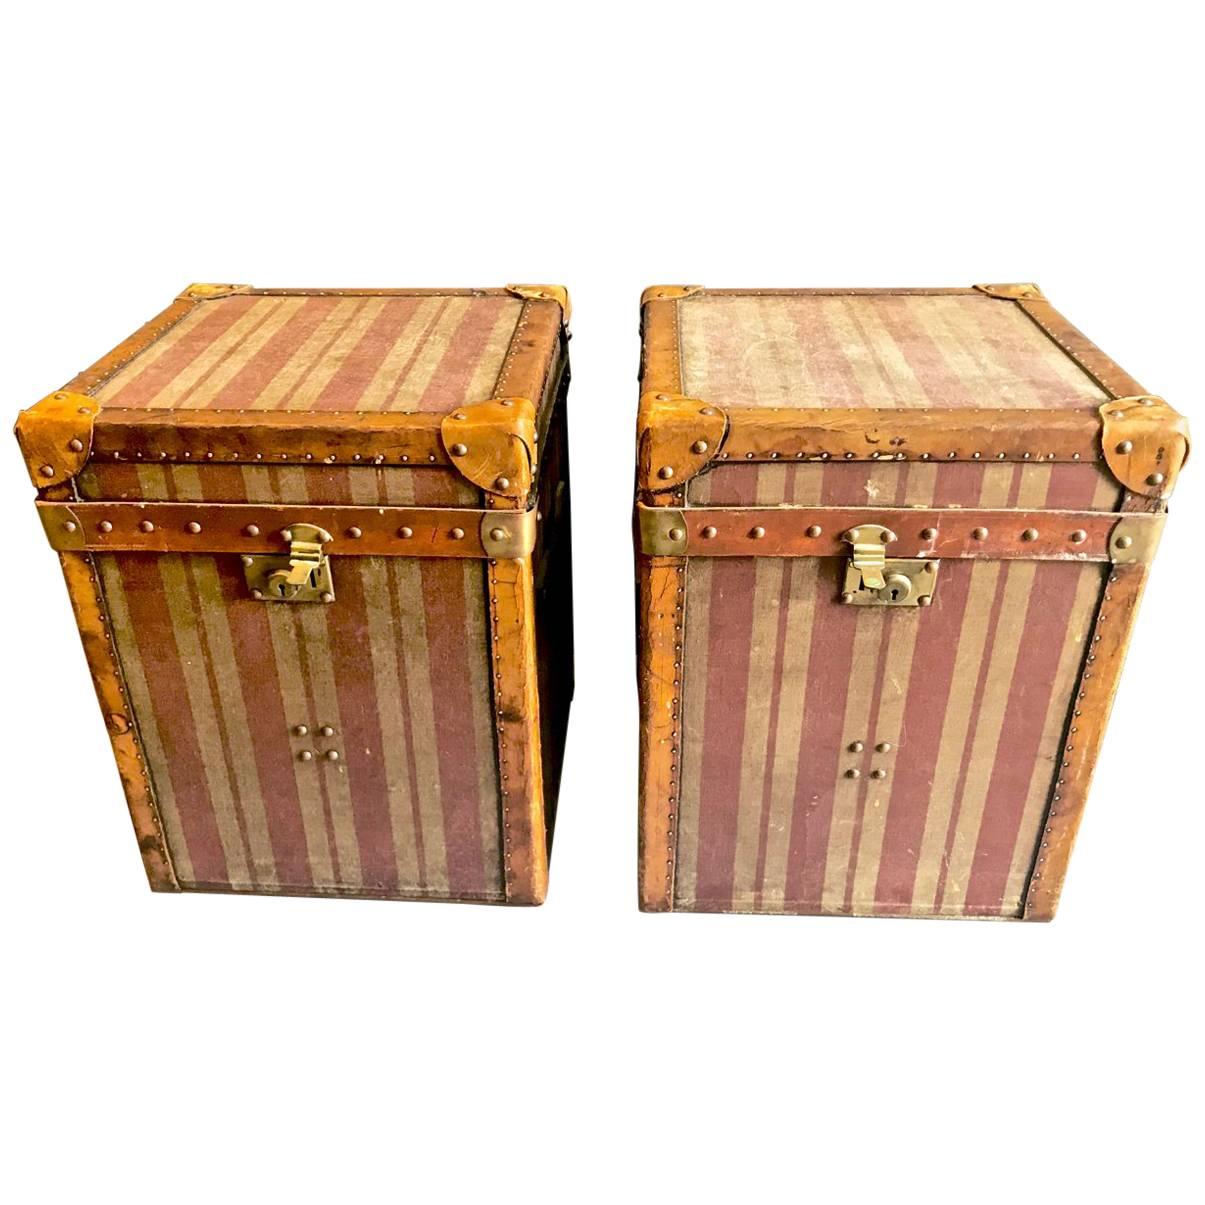 Pair of French Louis Vuitton-Style  Hat Trunks, c.1900